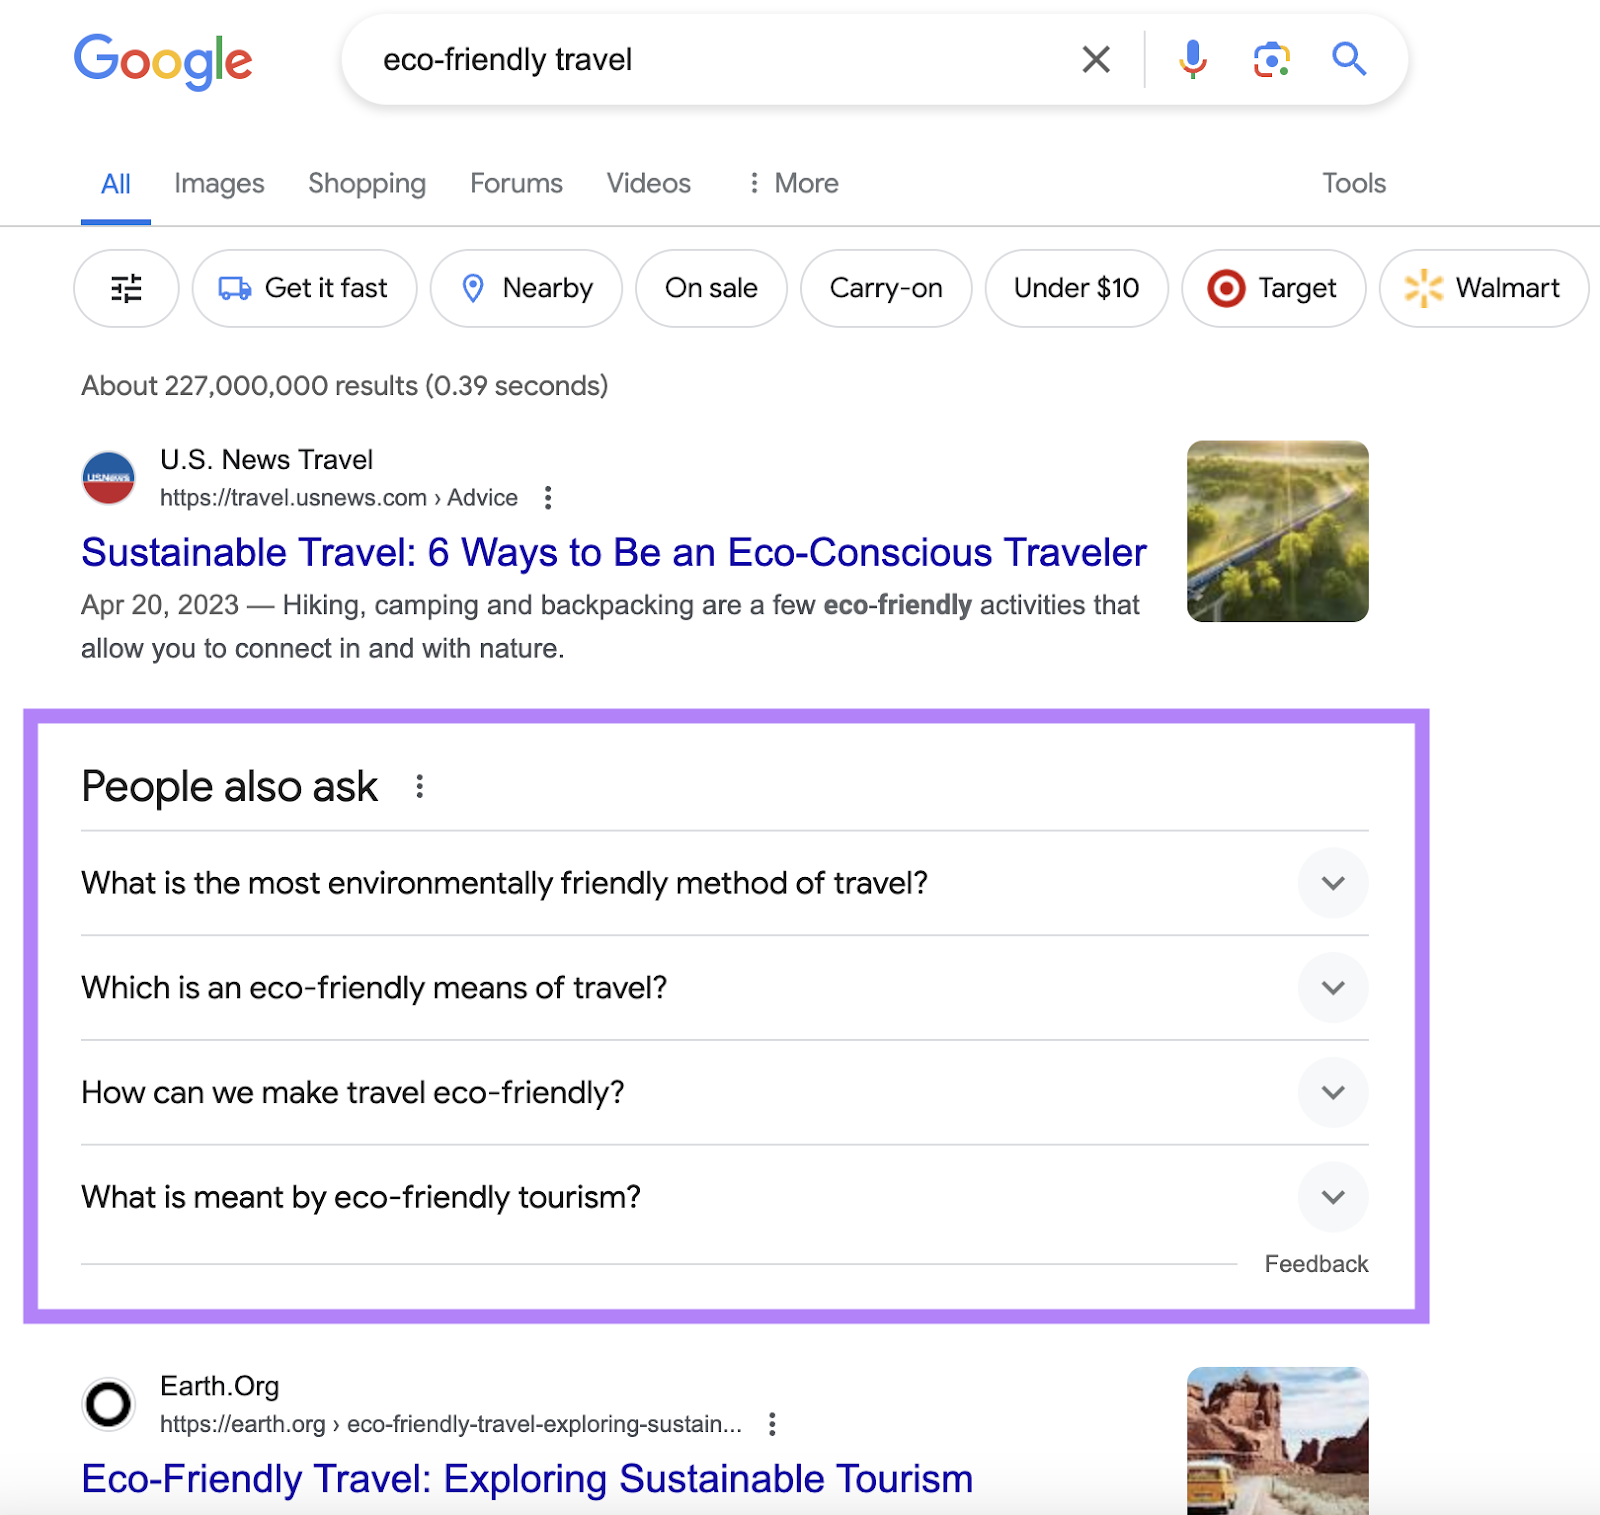 Google search results for "eco-friendly travel" showing the presence of a People Also Ask box.